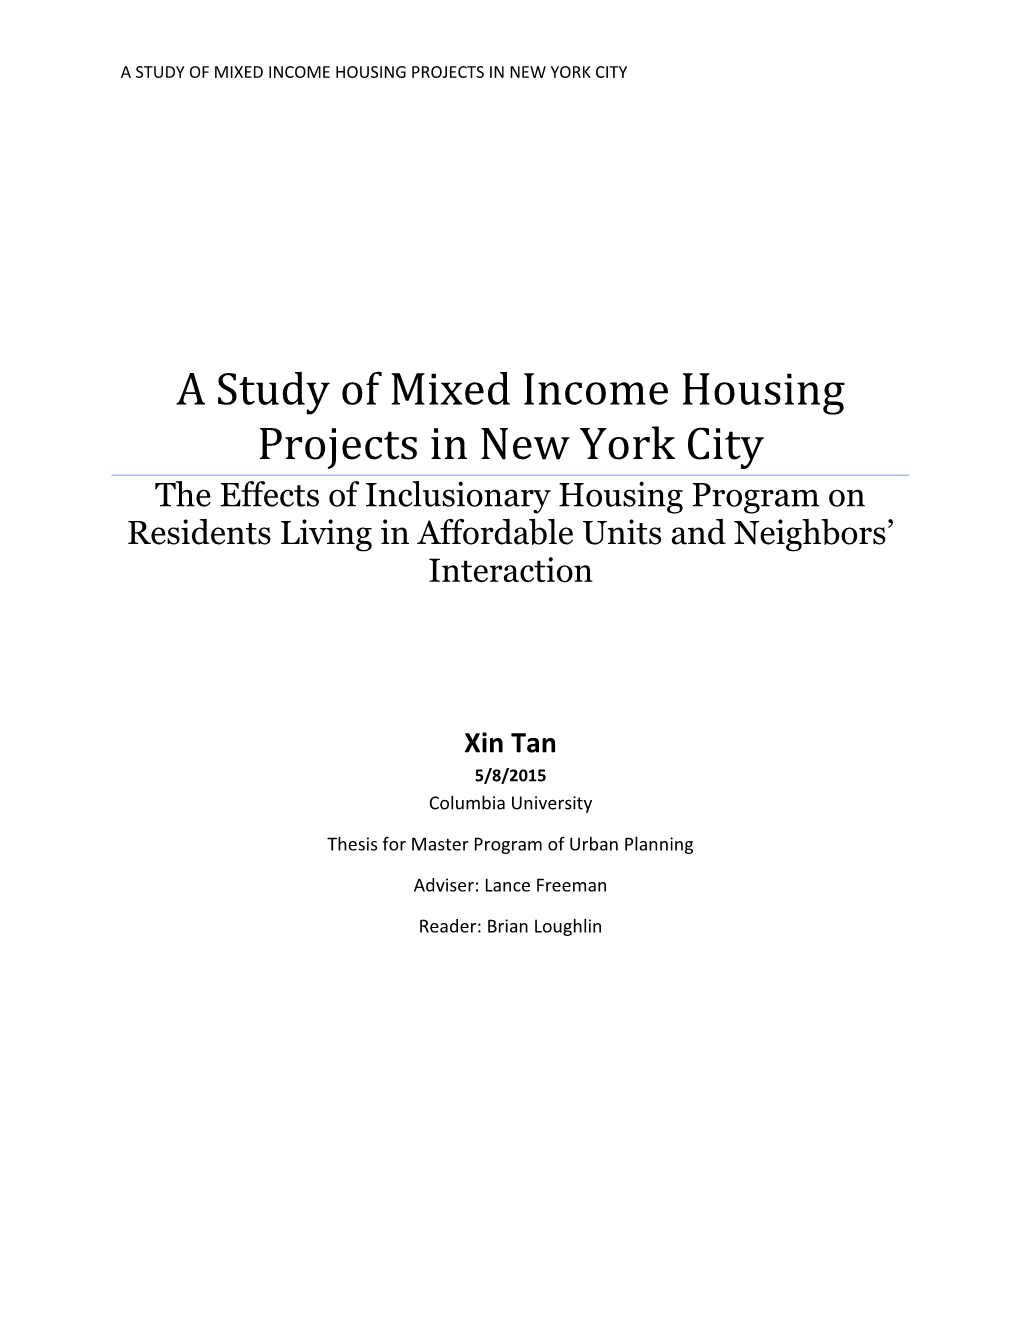 A Study of Mixed Income Housing Projects in New York City